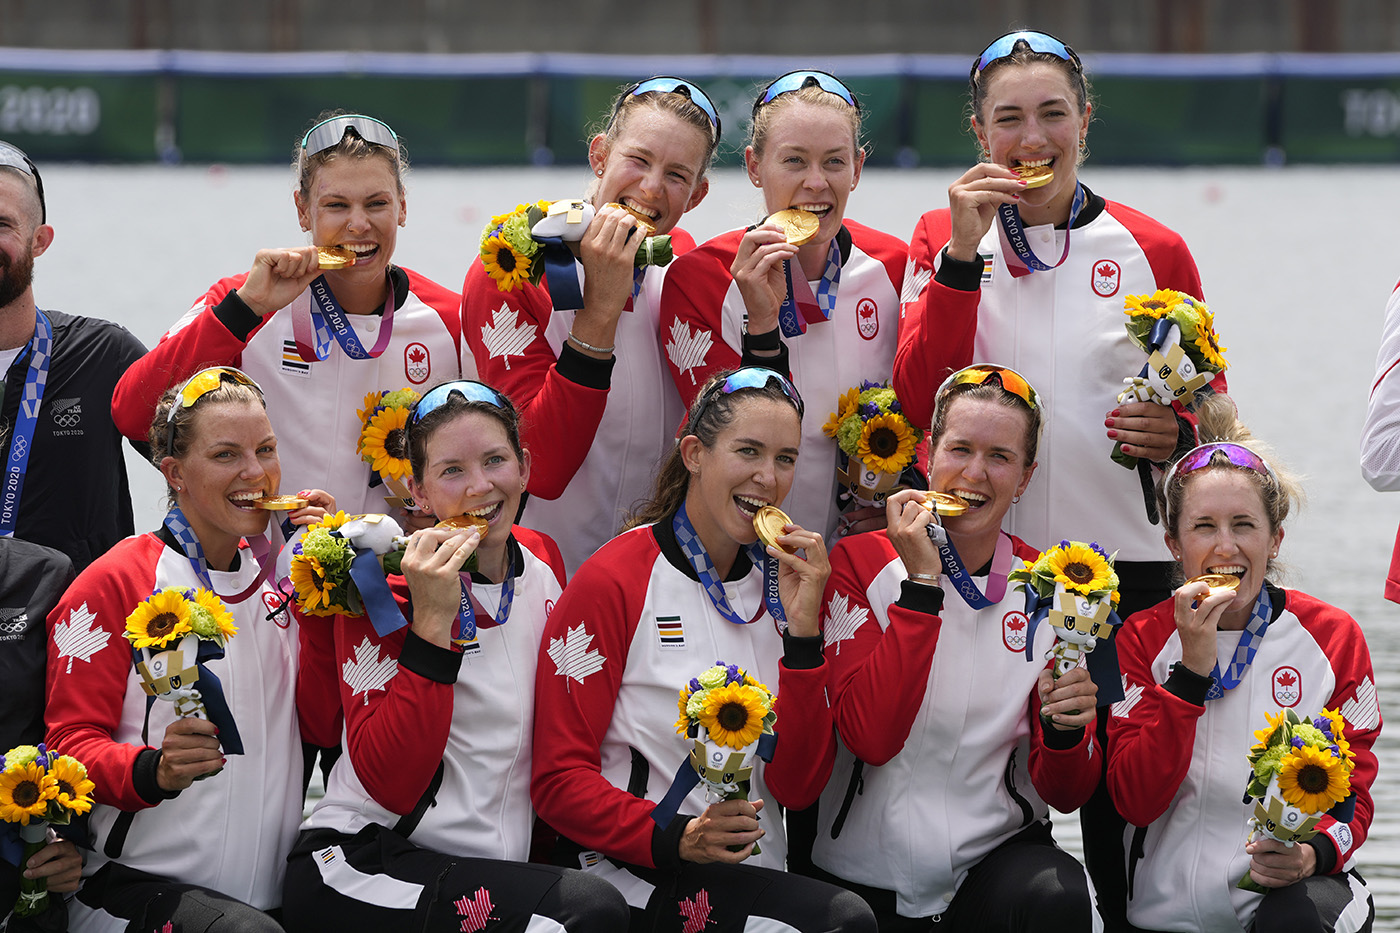 The Canadian rowing team in the women's eight celebrates its gold medal at the Tokyo Olympics.